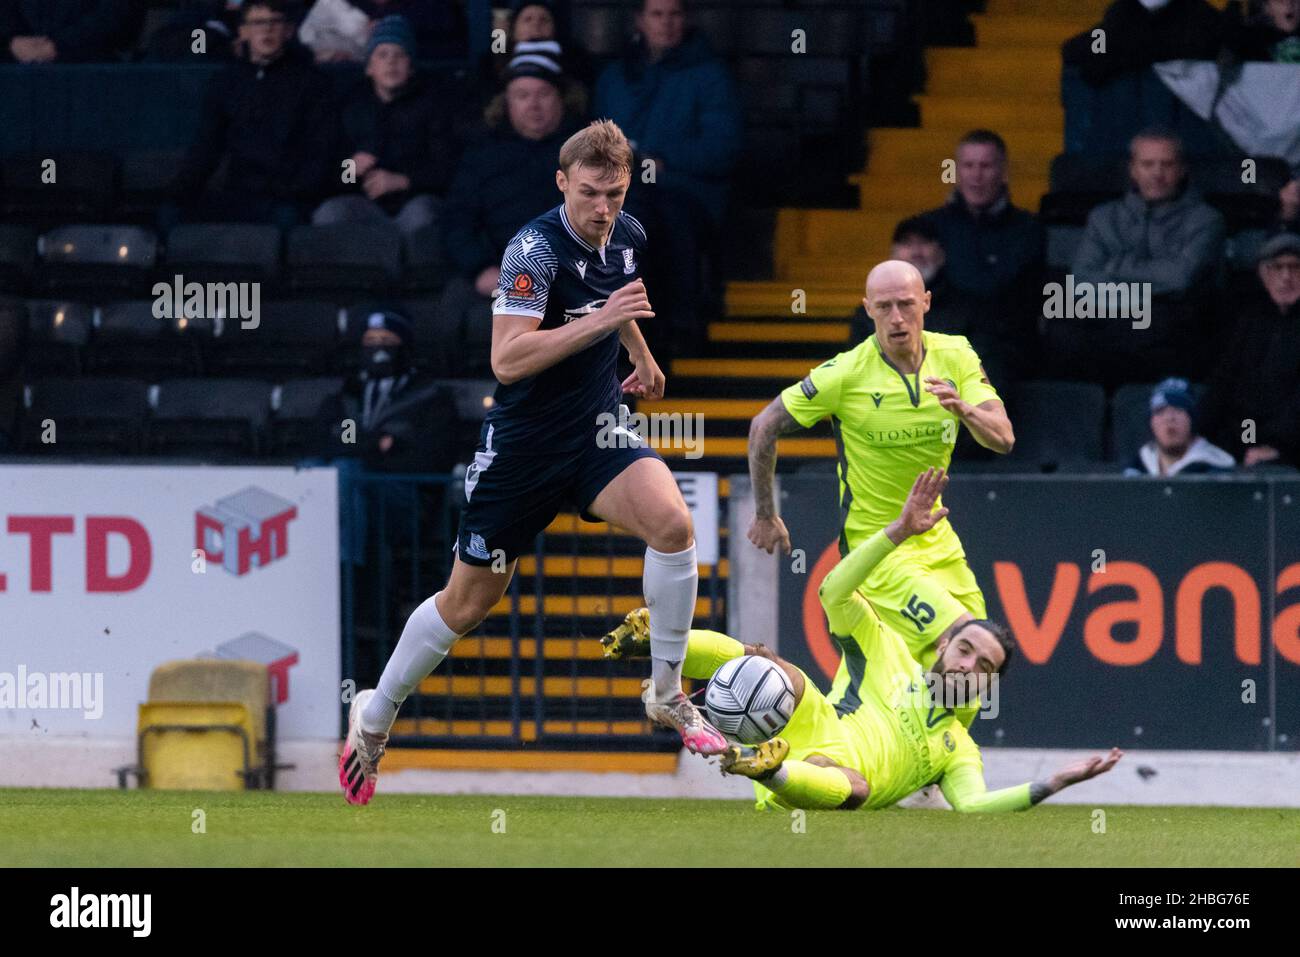 Sam Dalby playing for Southend in the FA Trophy 3rd round at Roots Hall, Southend United v Dorking Wanderers football match. Challenging Stock Photo